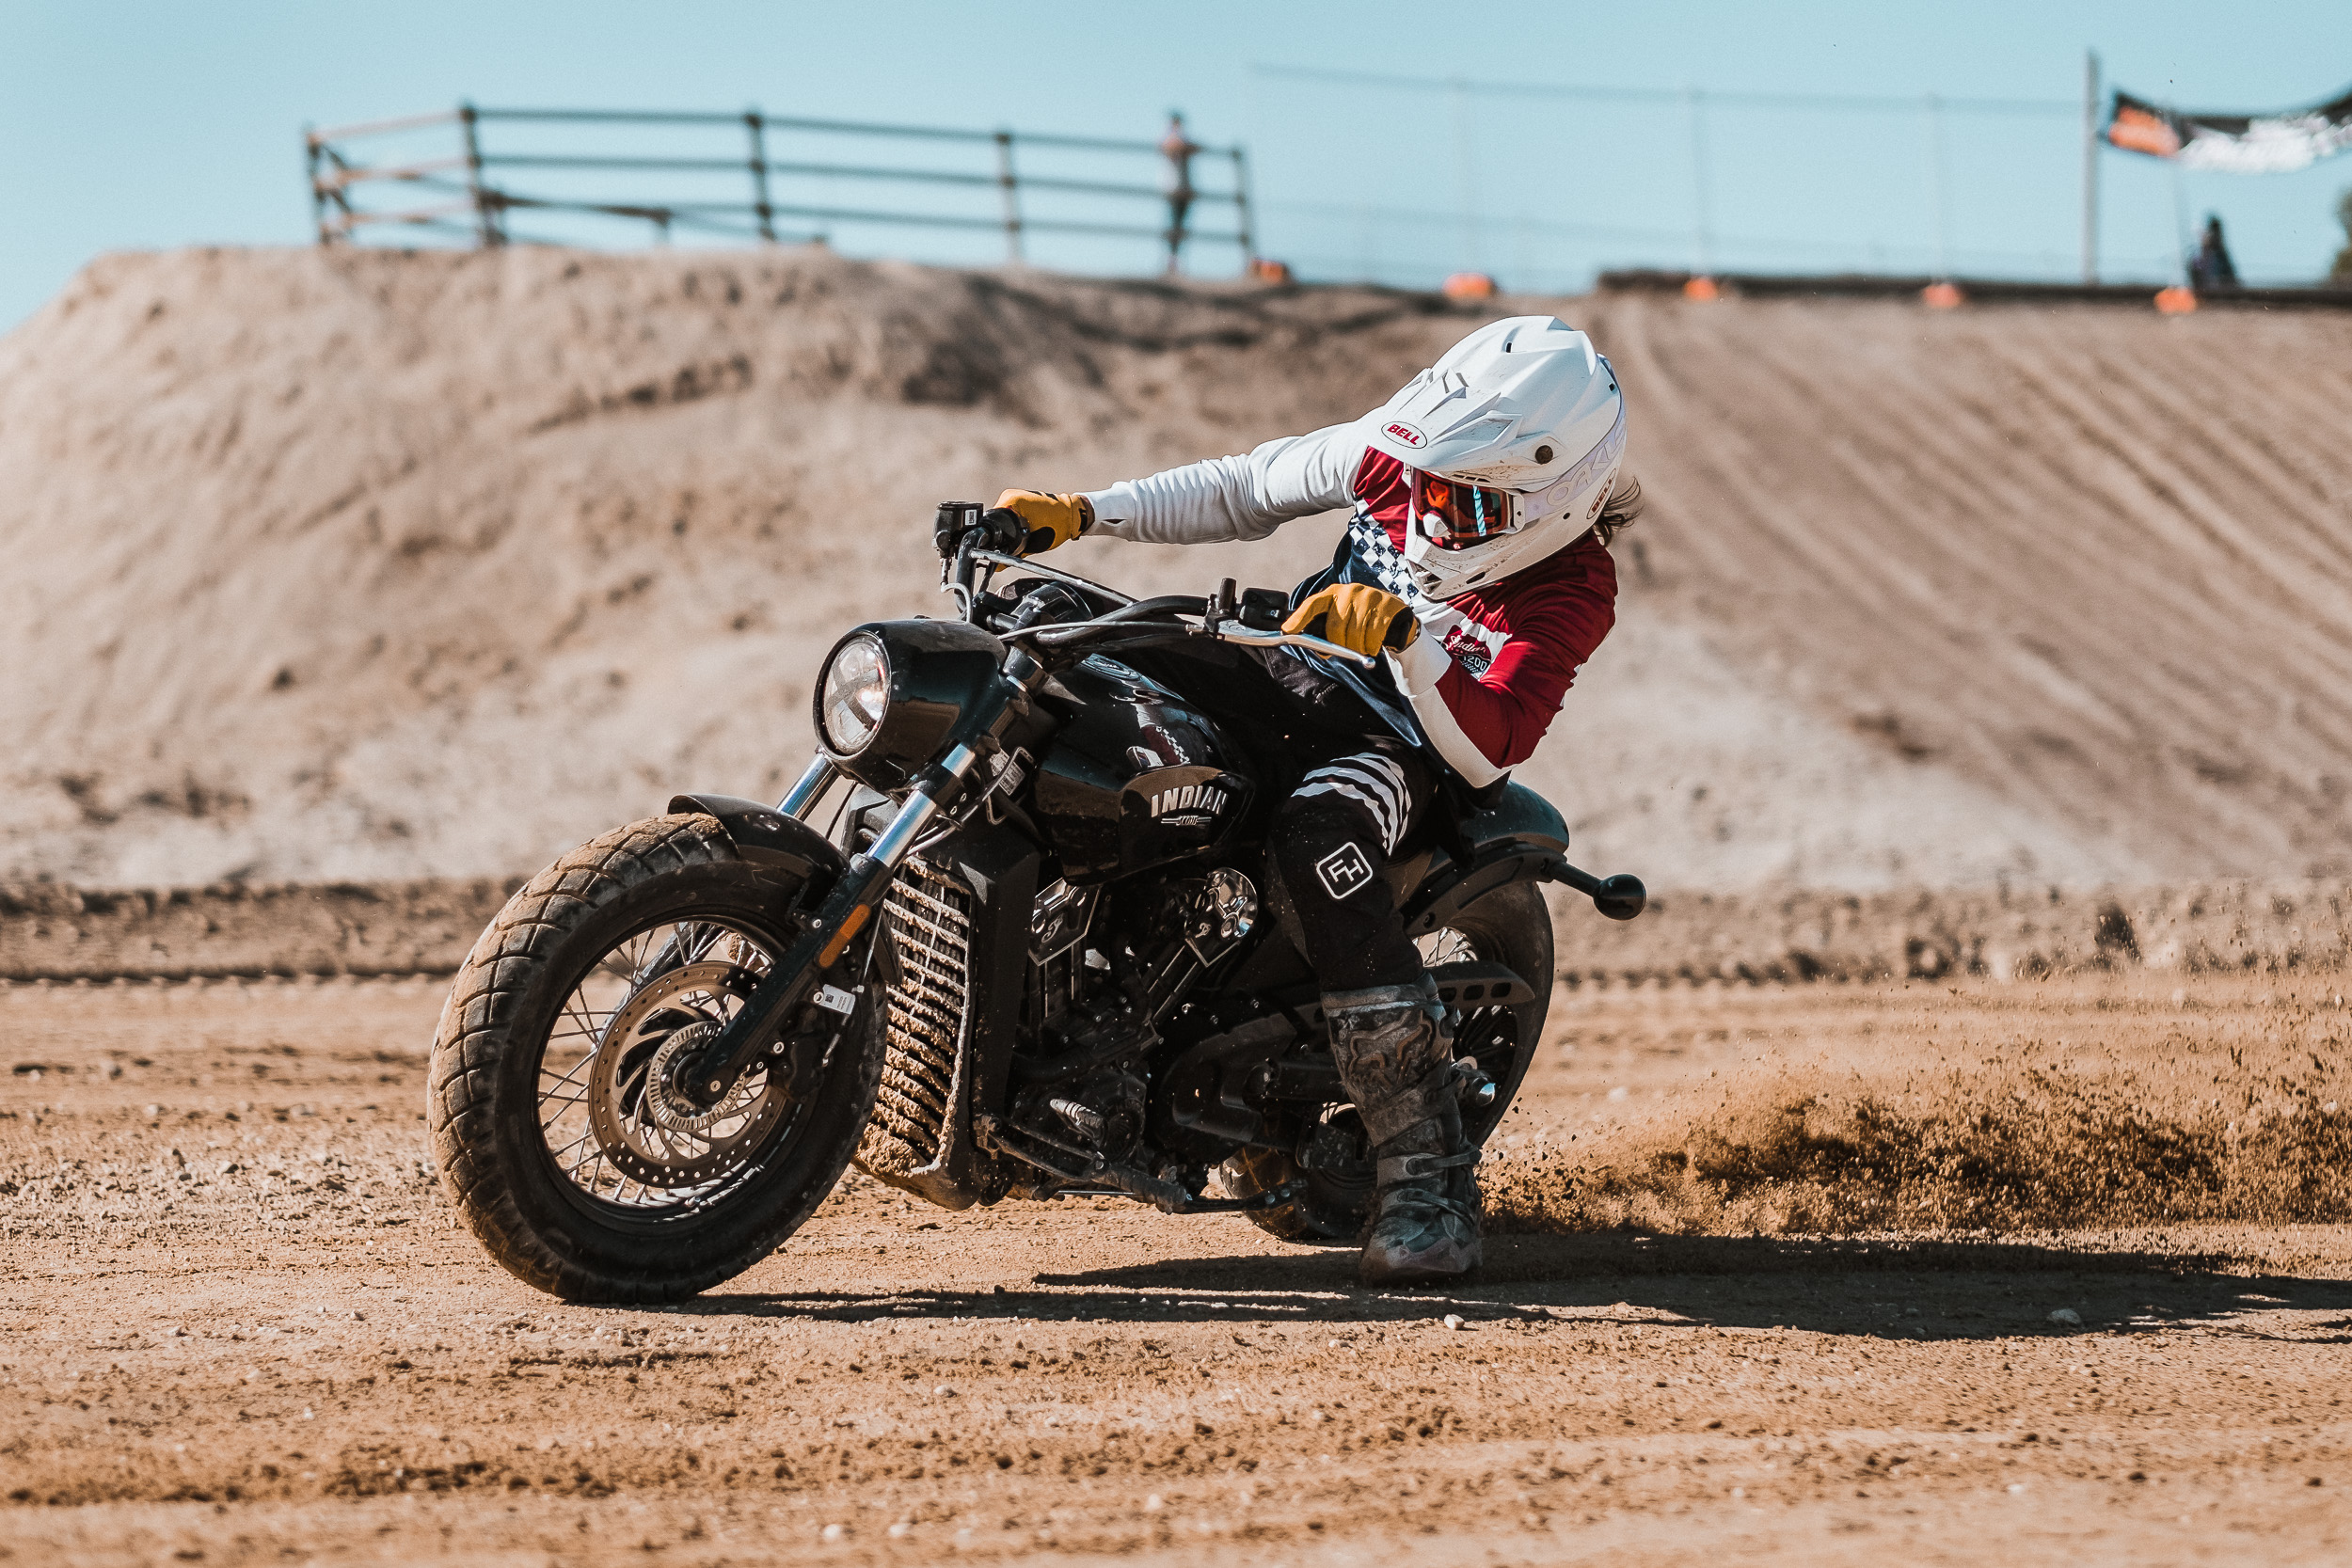  A motorcycle rider on an Indian Scout races on a dirt flat track circuit